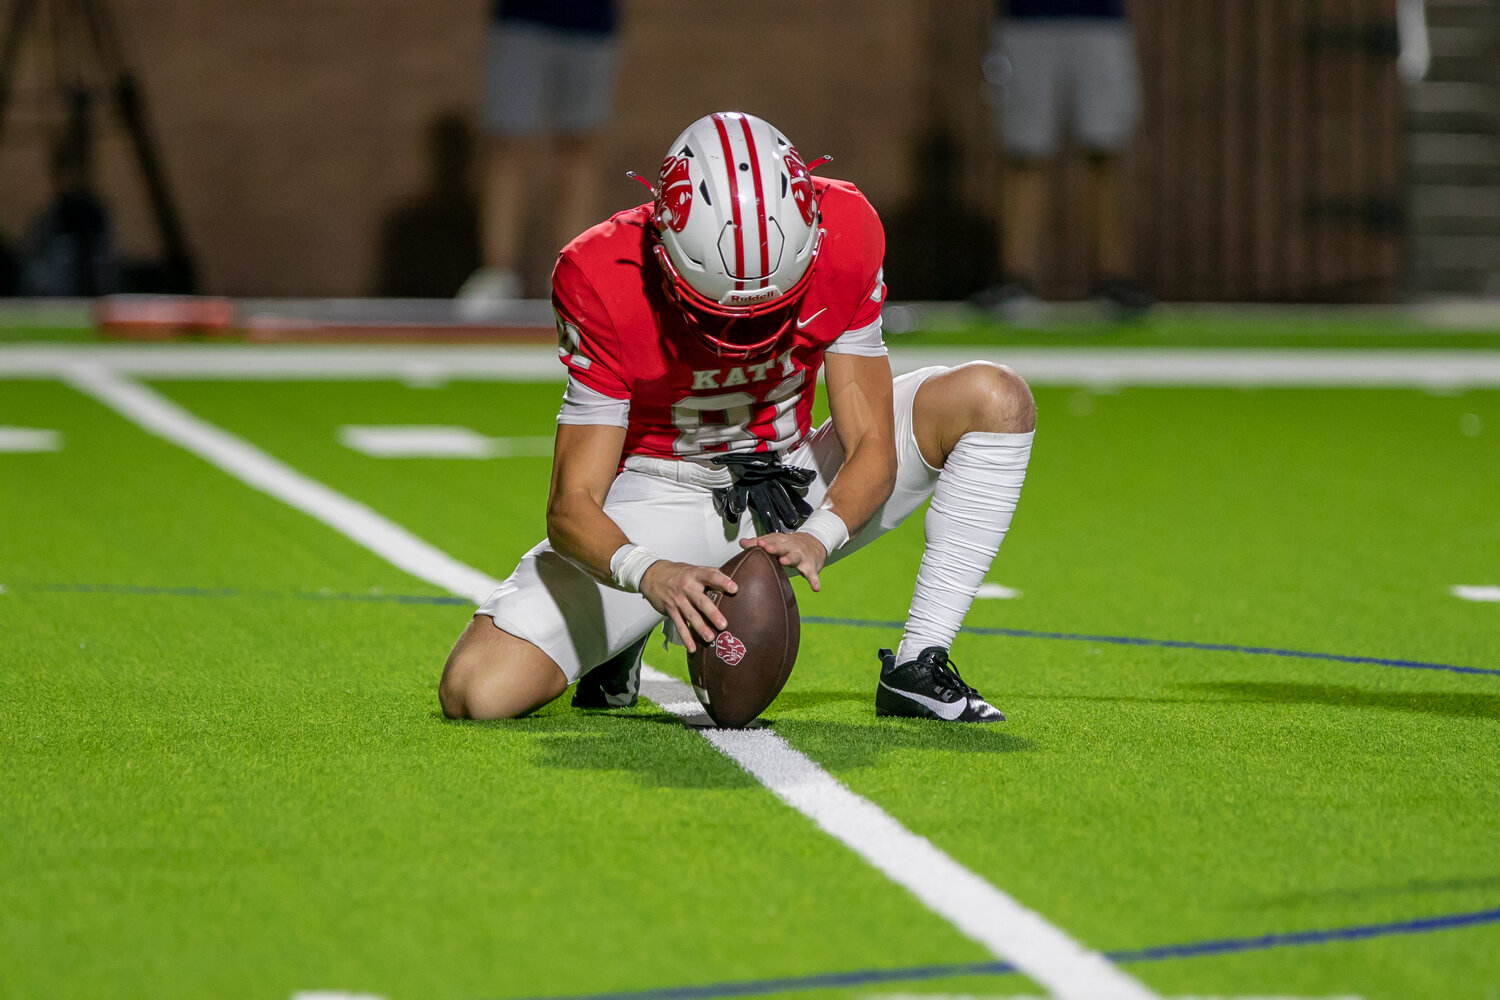 Carter Sears holds an extra point during Friday's game between Katy and Tompkins at Rhodes Stadium.